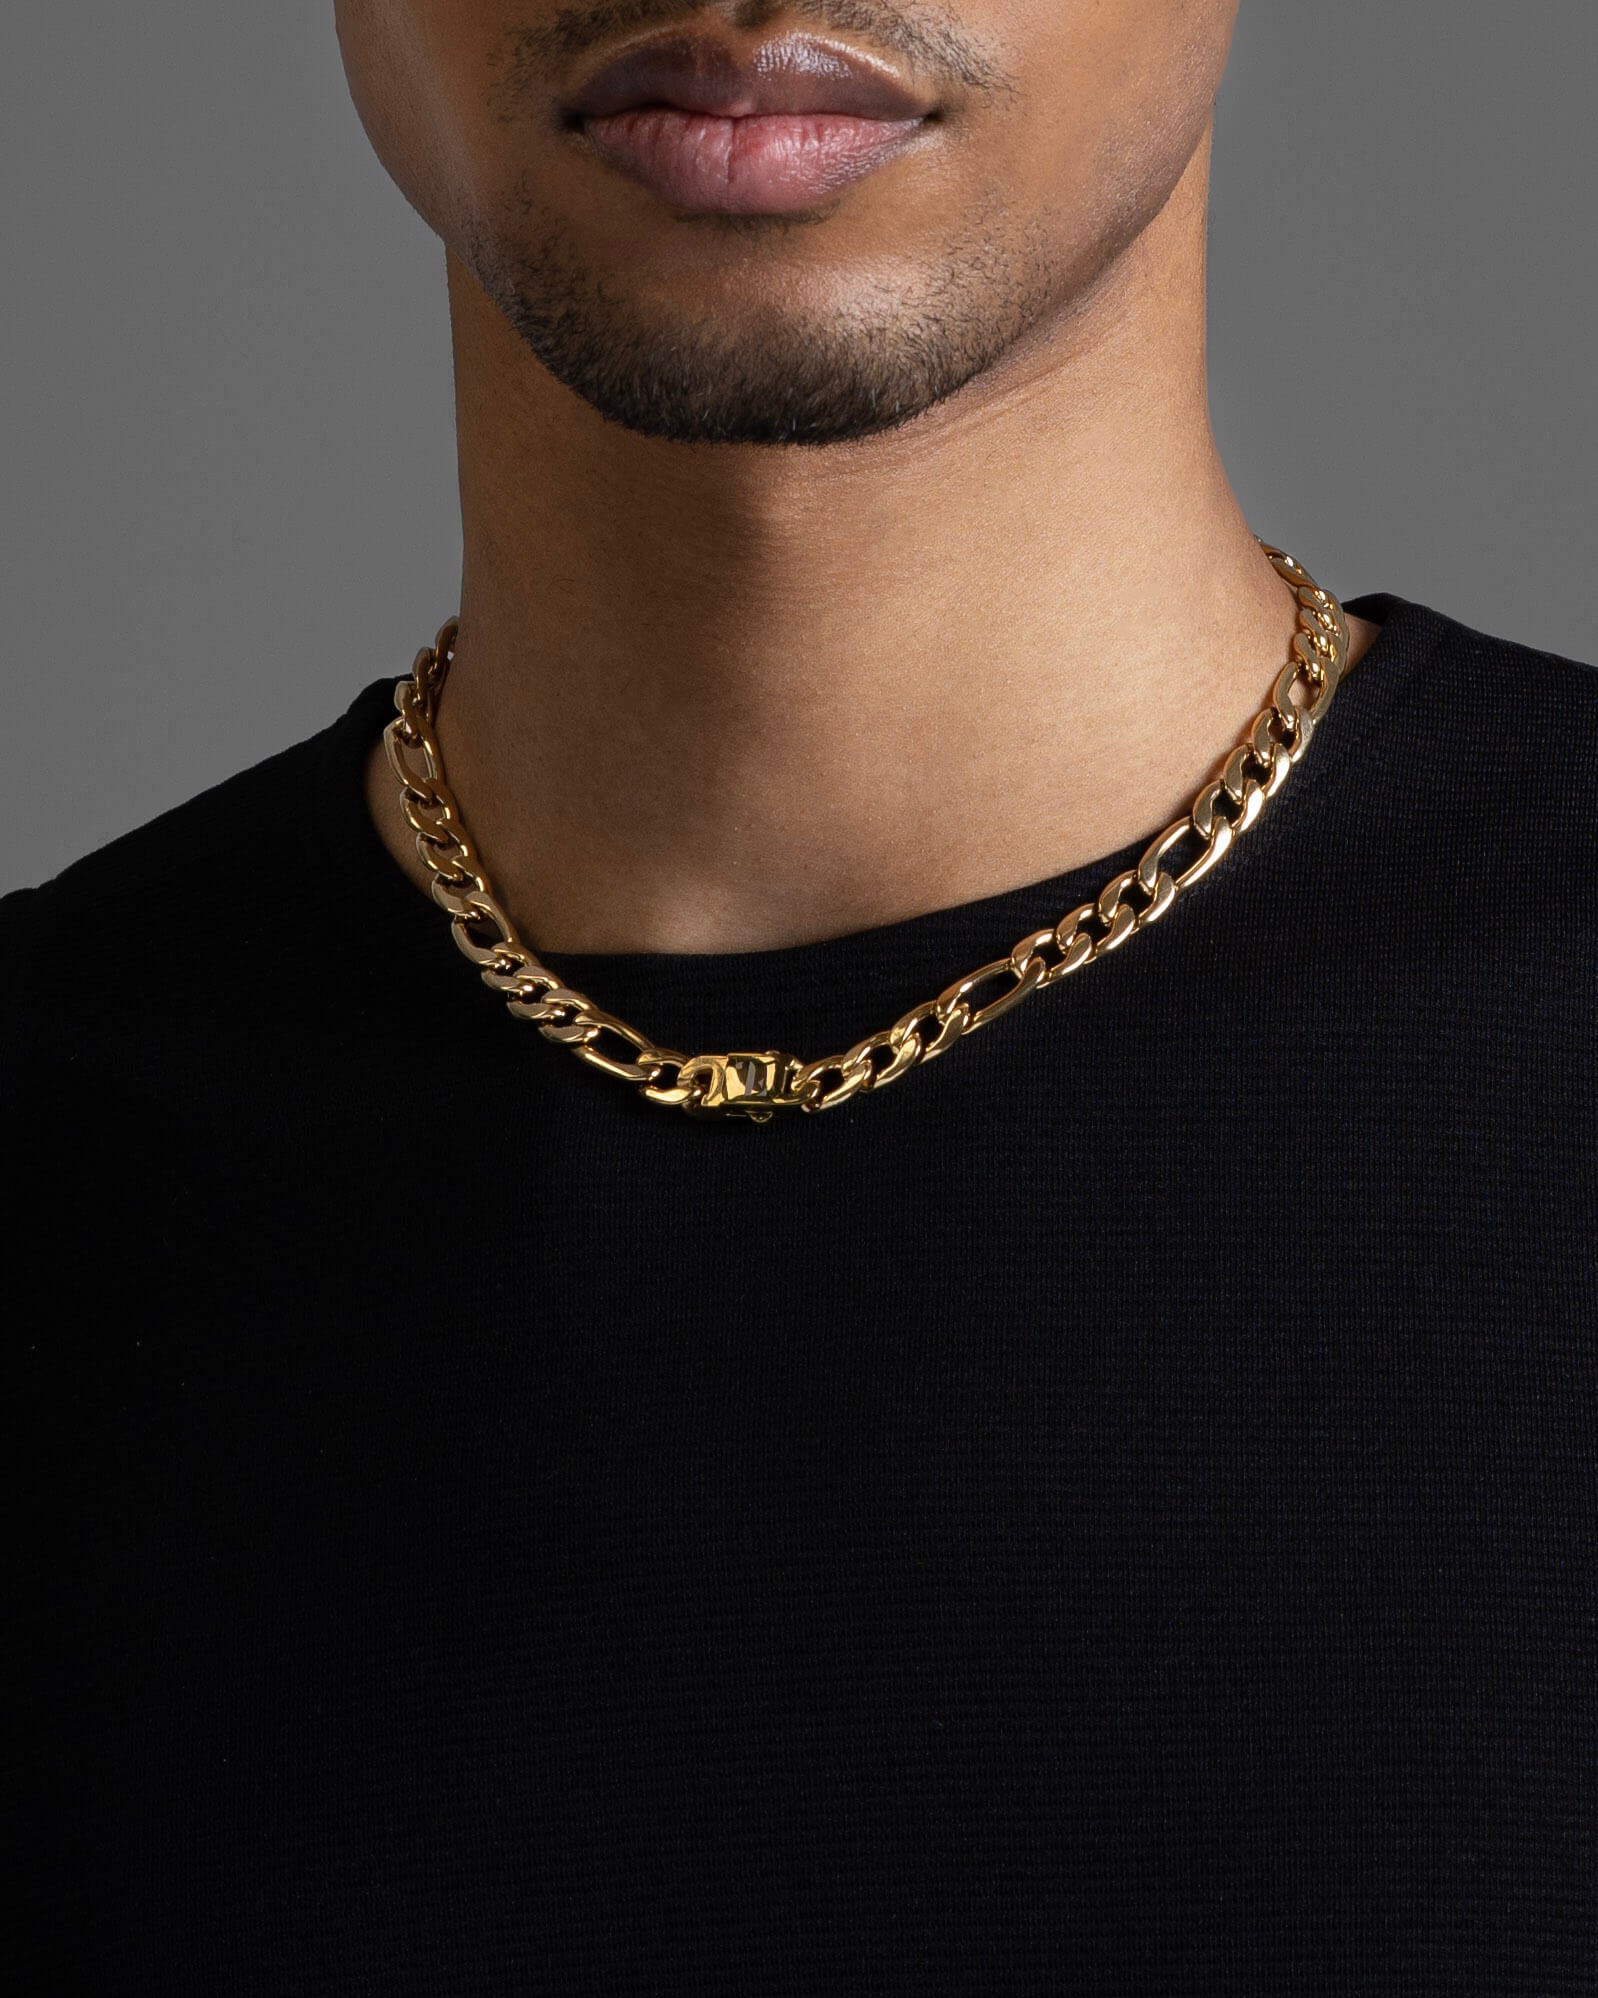 Berg men's necklace by Five Jwlry, featuring a bold 9mm smooth figaro chain in 14k gold, made from water-resistant 316L stainless steel. Offered in sizes 45cm and 50cm. Hypoallergenic with a 2-year warranty.